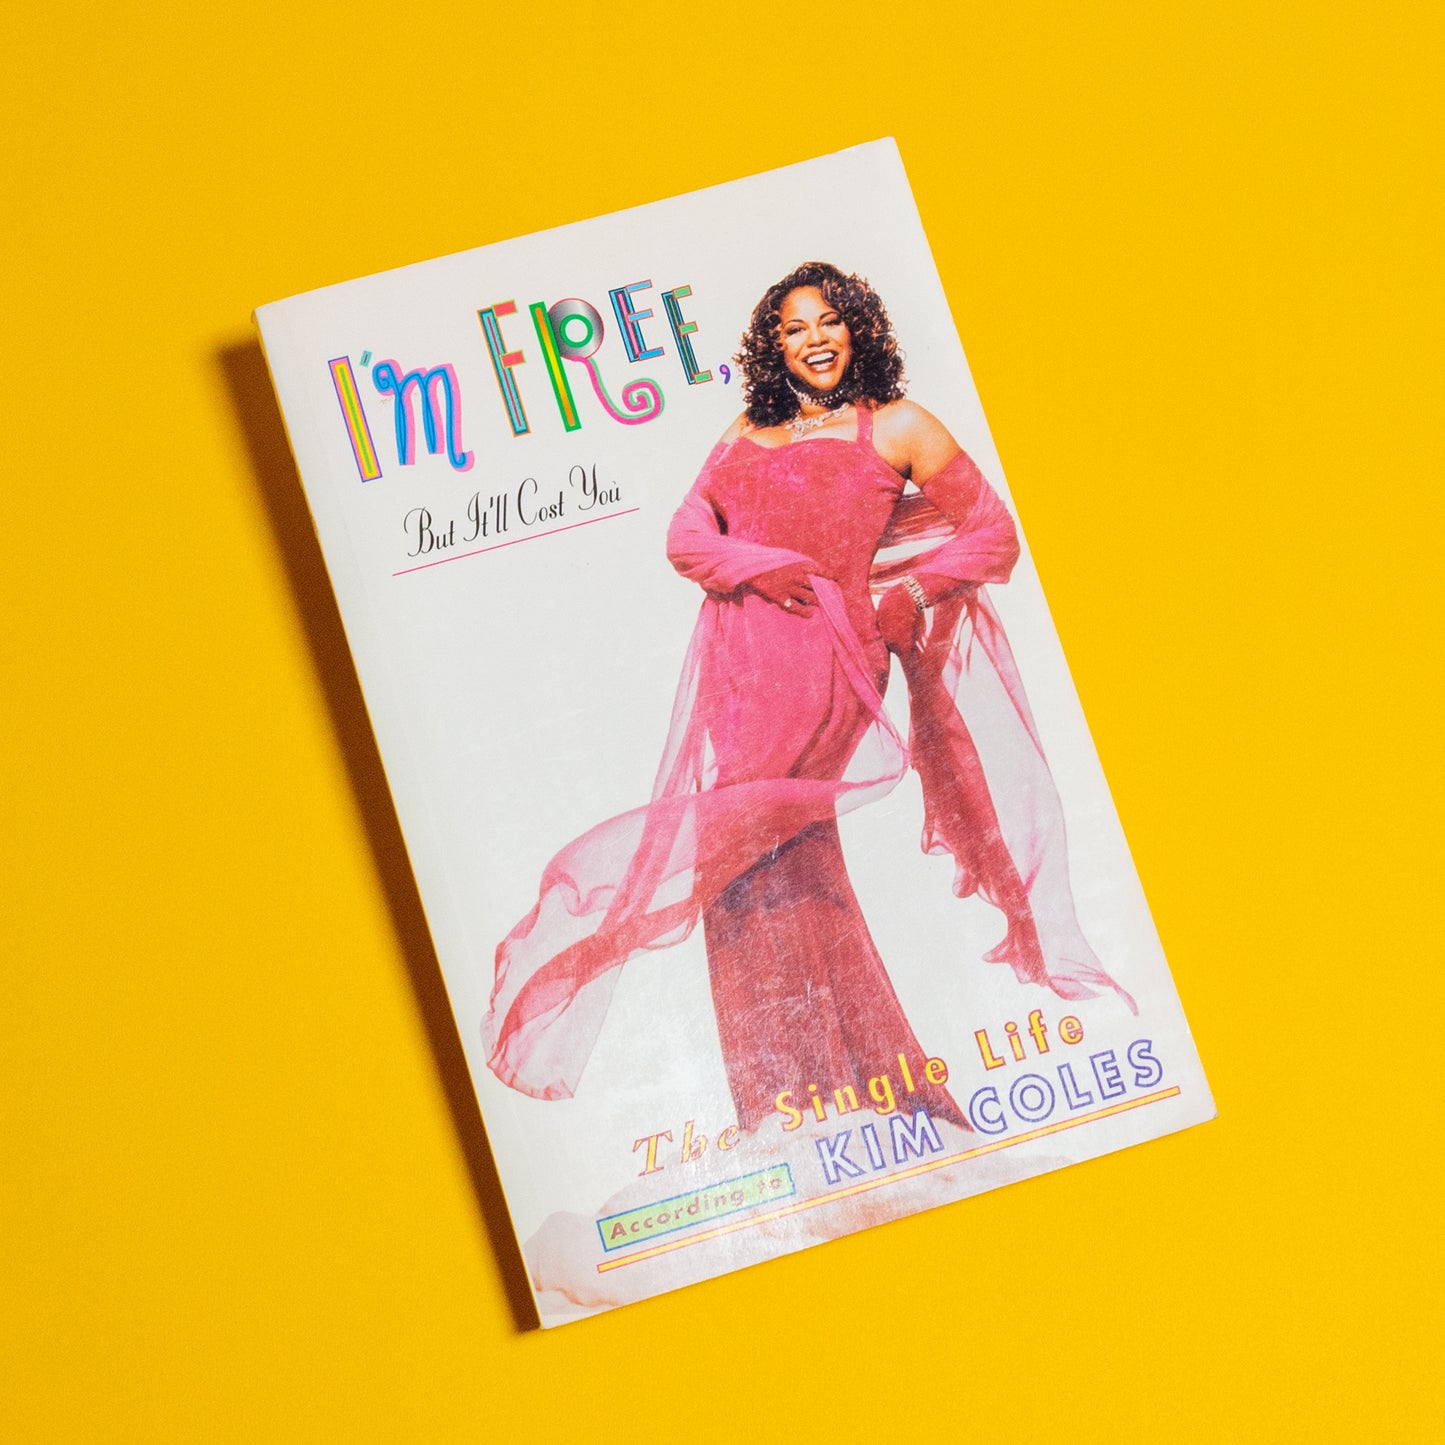 I'm Free, But It'll Cost You, The Single Life According to Kim Coles, by Kim Coles (Book)